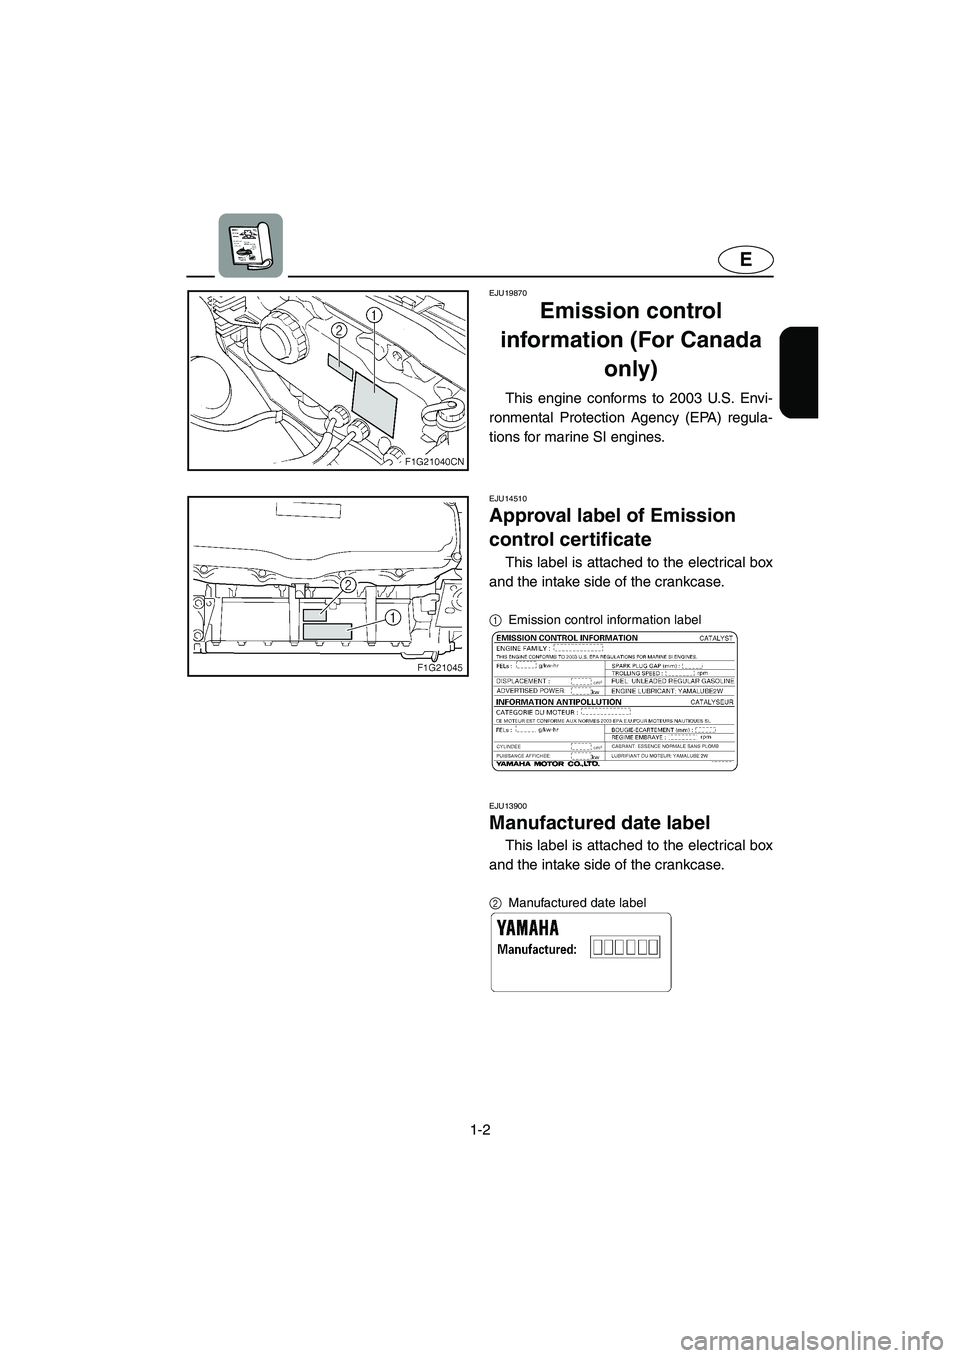 YAMAHA GP1300R 2003  Owners Manual 1-2
E
EJU19870
Emission control 
information (For Canada 
only) 
This engine conforms to 2003 U.S. Envi-
ronmental Protection Agency (EPA) regula-
tions for marine SI engines. 
EJU14510 
Approval labe